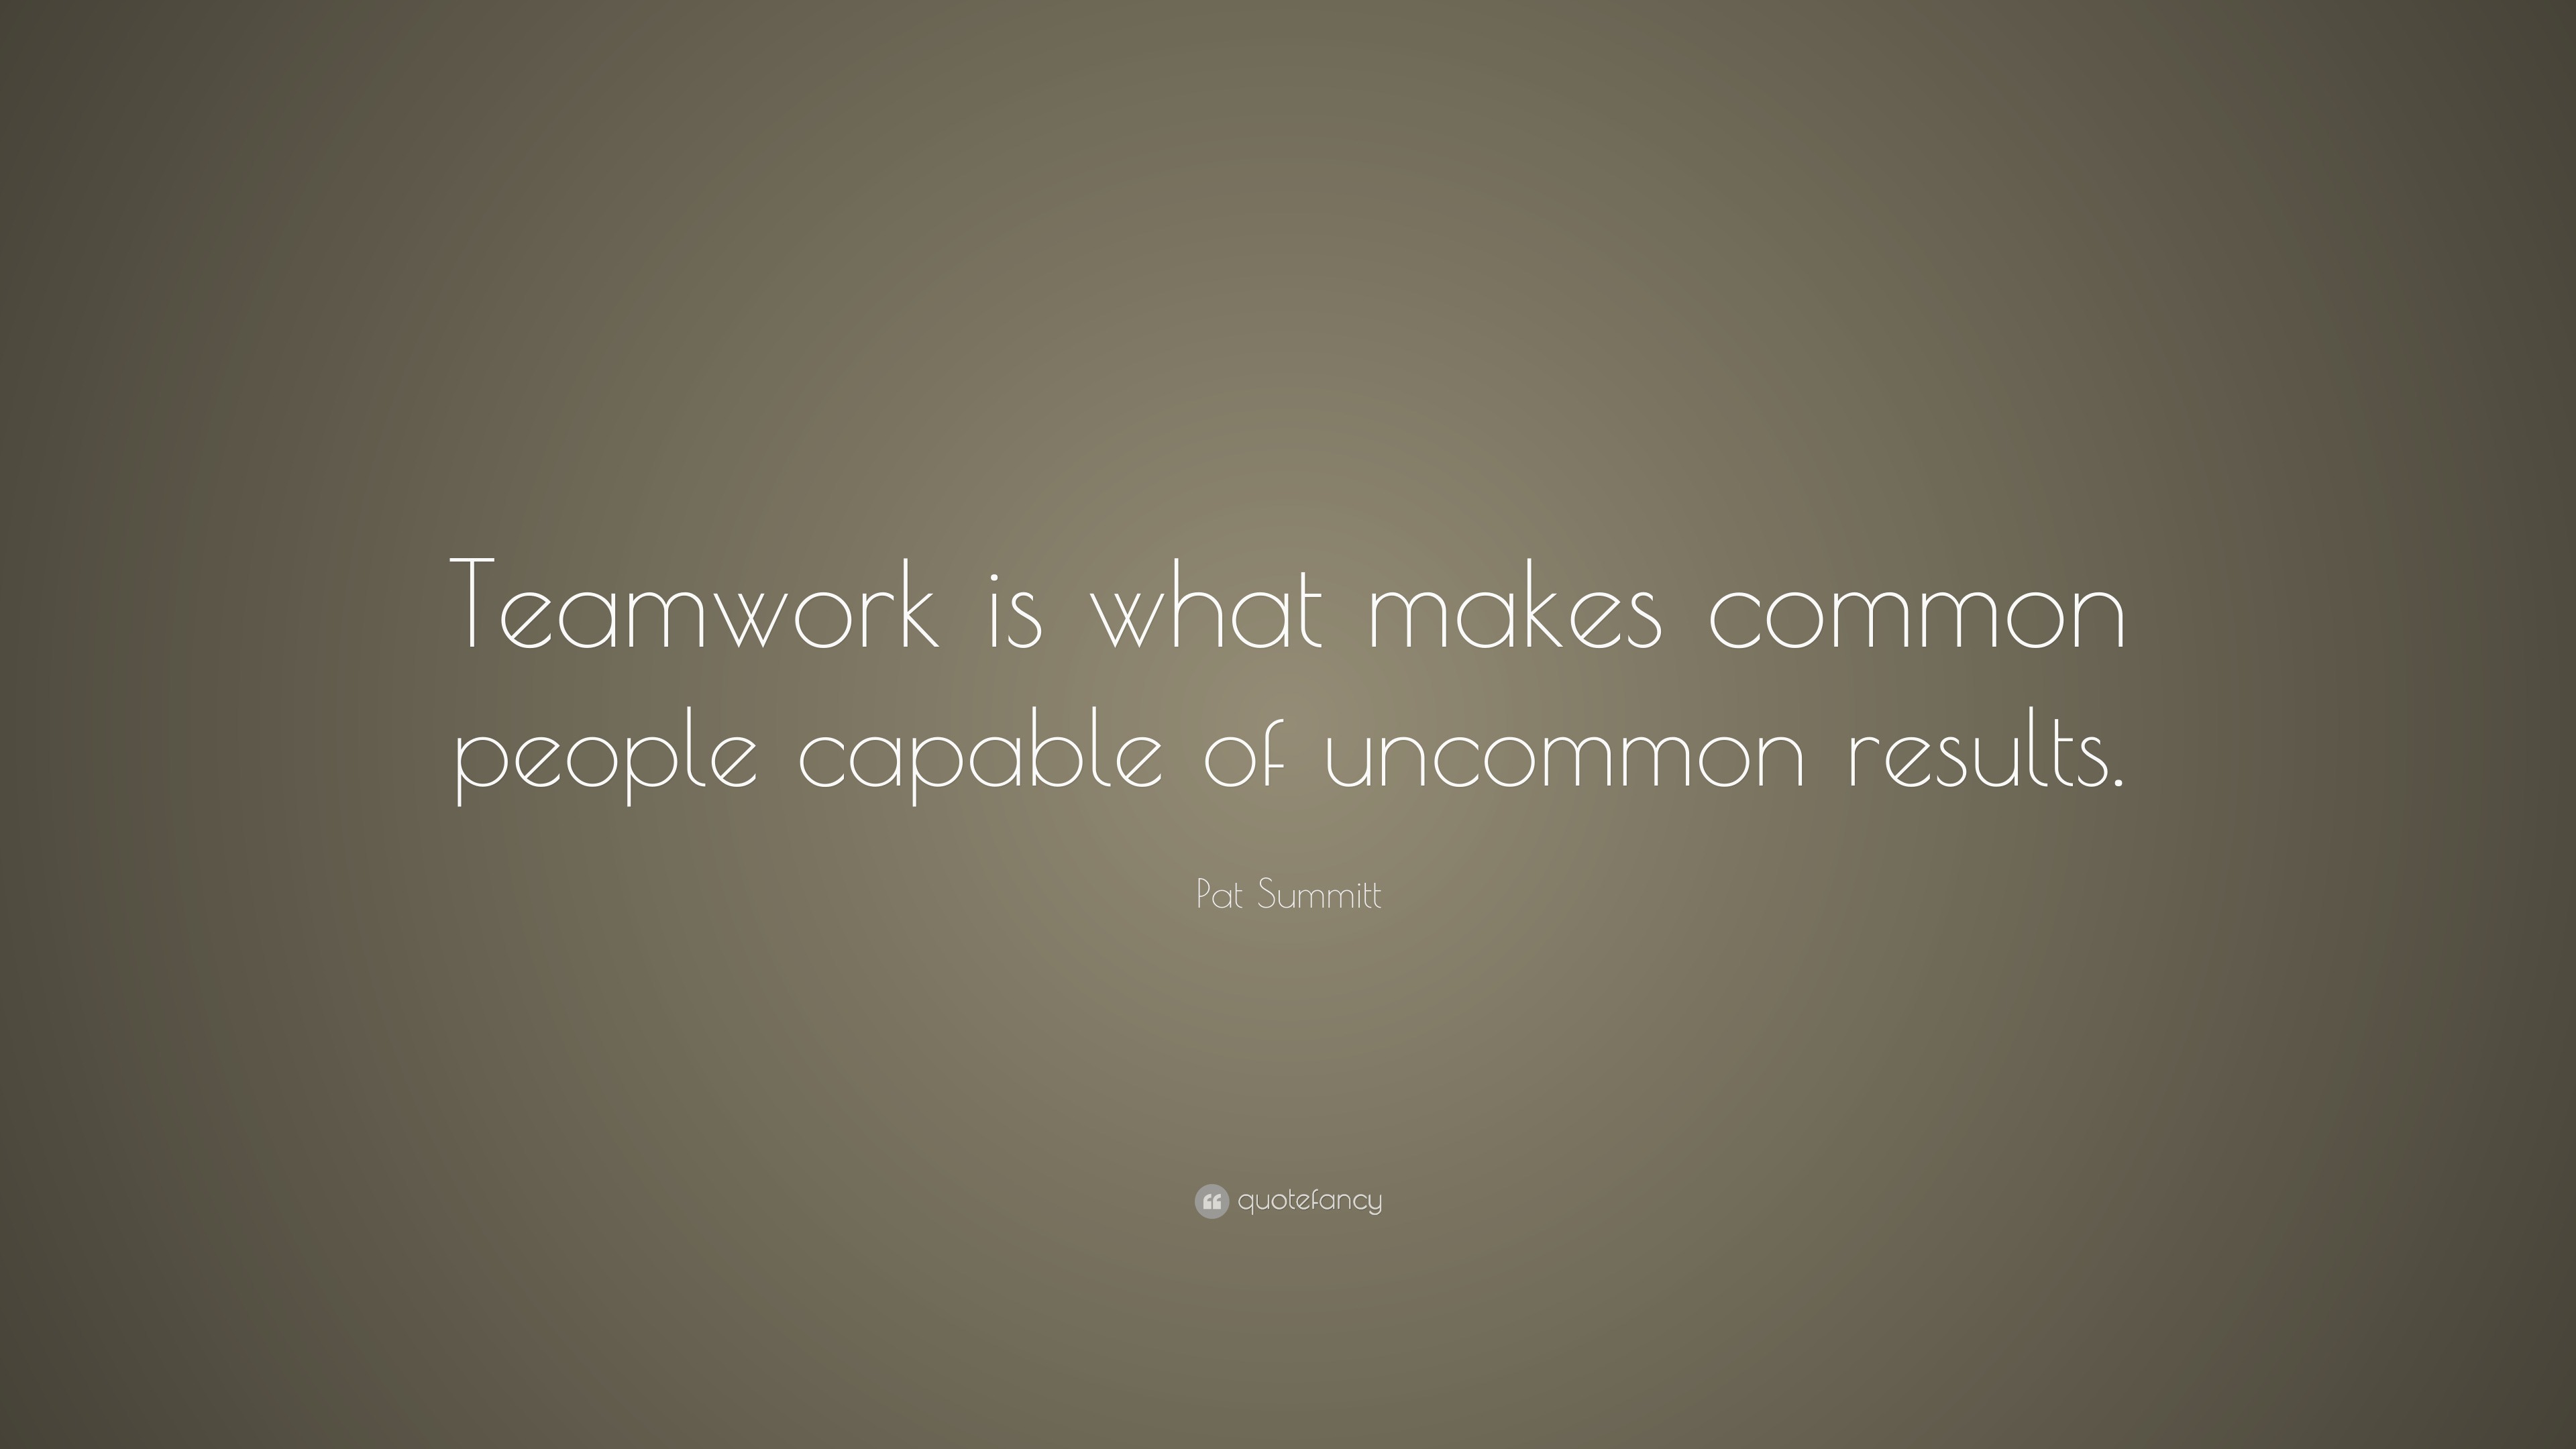 Pat Summitt Quote: “Teamwork is what makes common people capable of ...